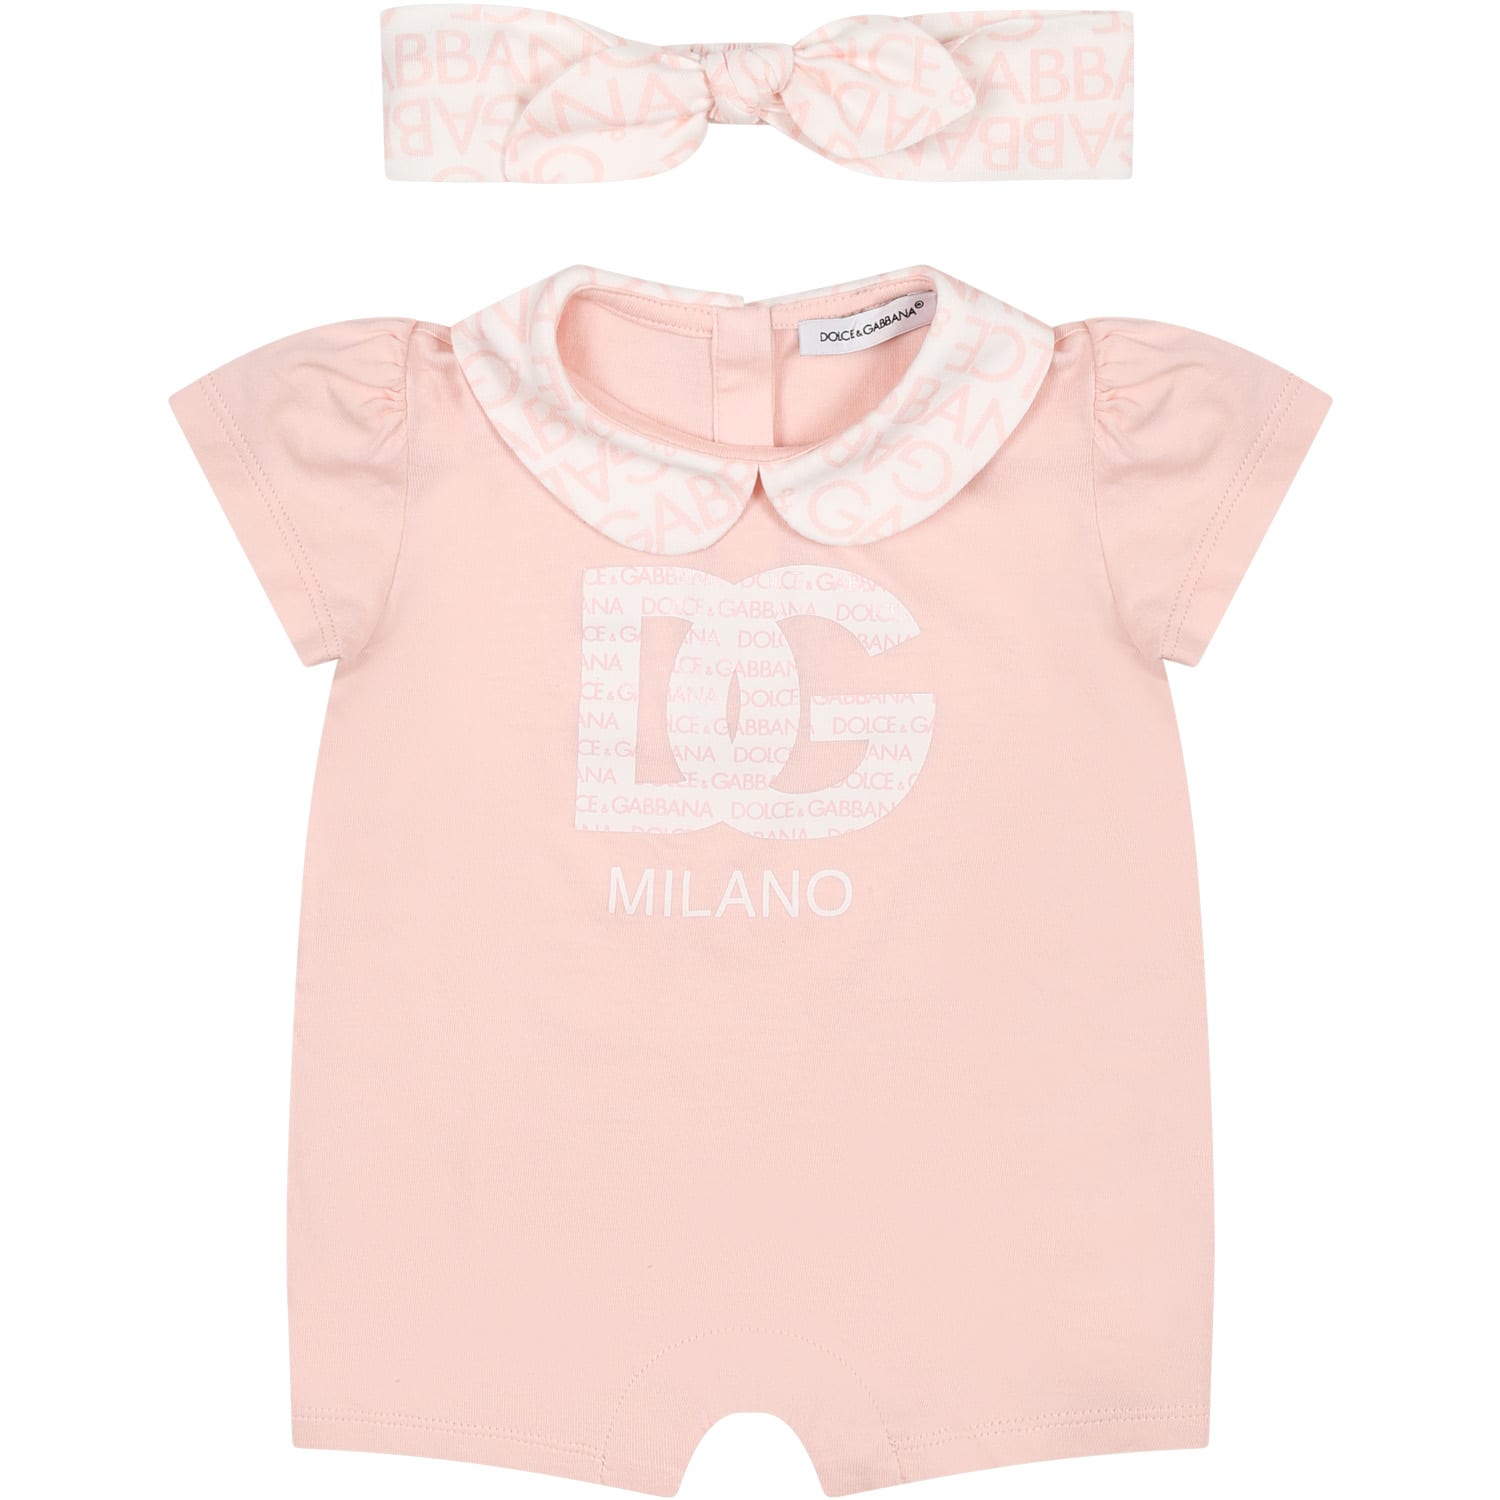 DOLCE & GABBANA PINK ROMPER FOR BABY GIRL WITH LOGO